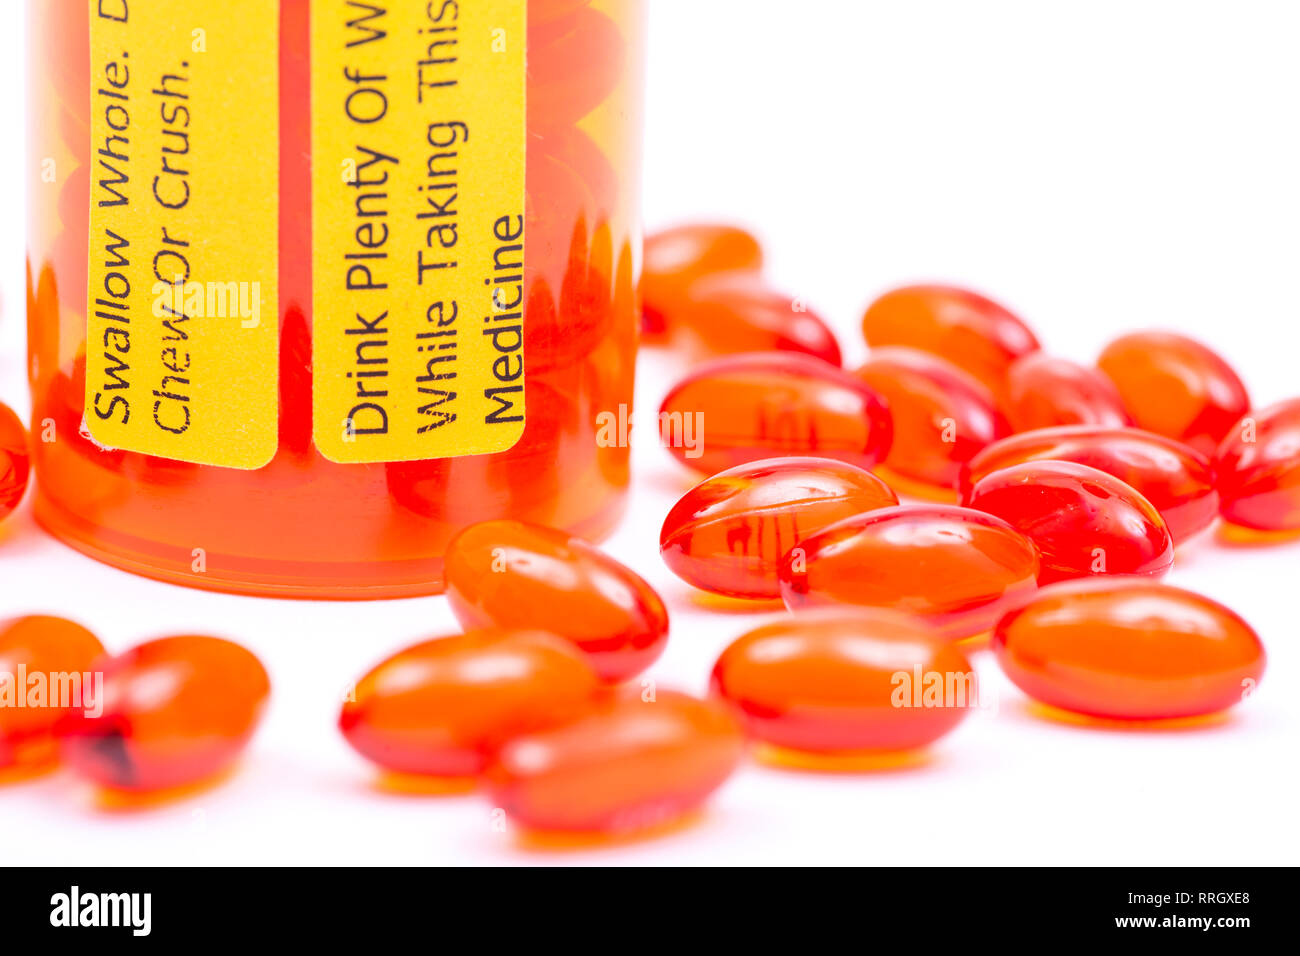 Docusate. Swallow whole Do not chew or crush Drink plenty of water while taking this medicine LABELS Stock Photo